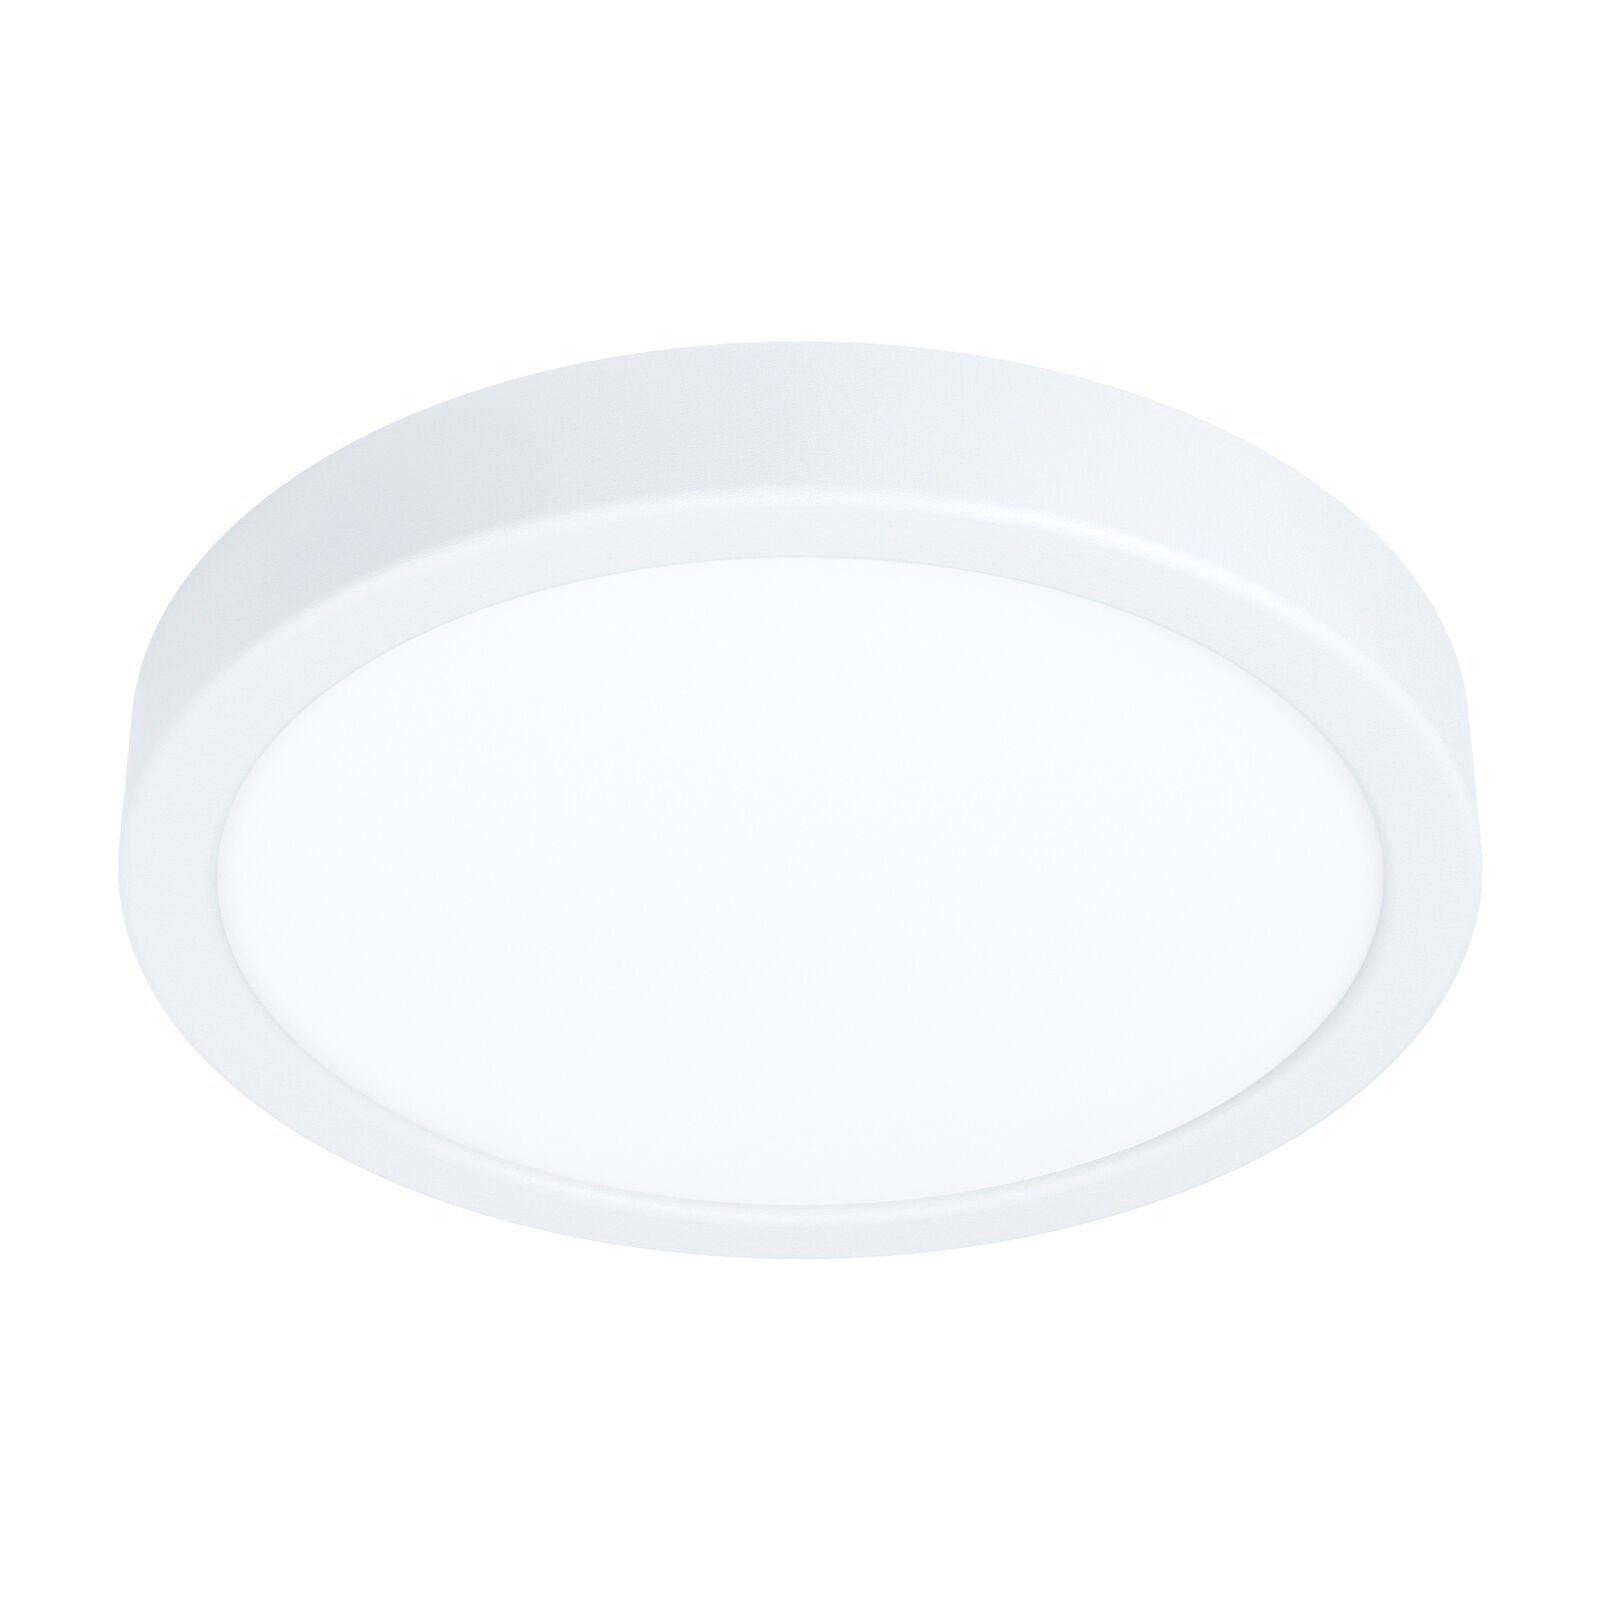 Wall / Ceiling Light White 210mm Round Surface Mounted 16.5W LED 4000K